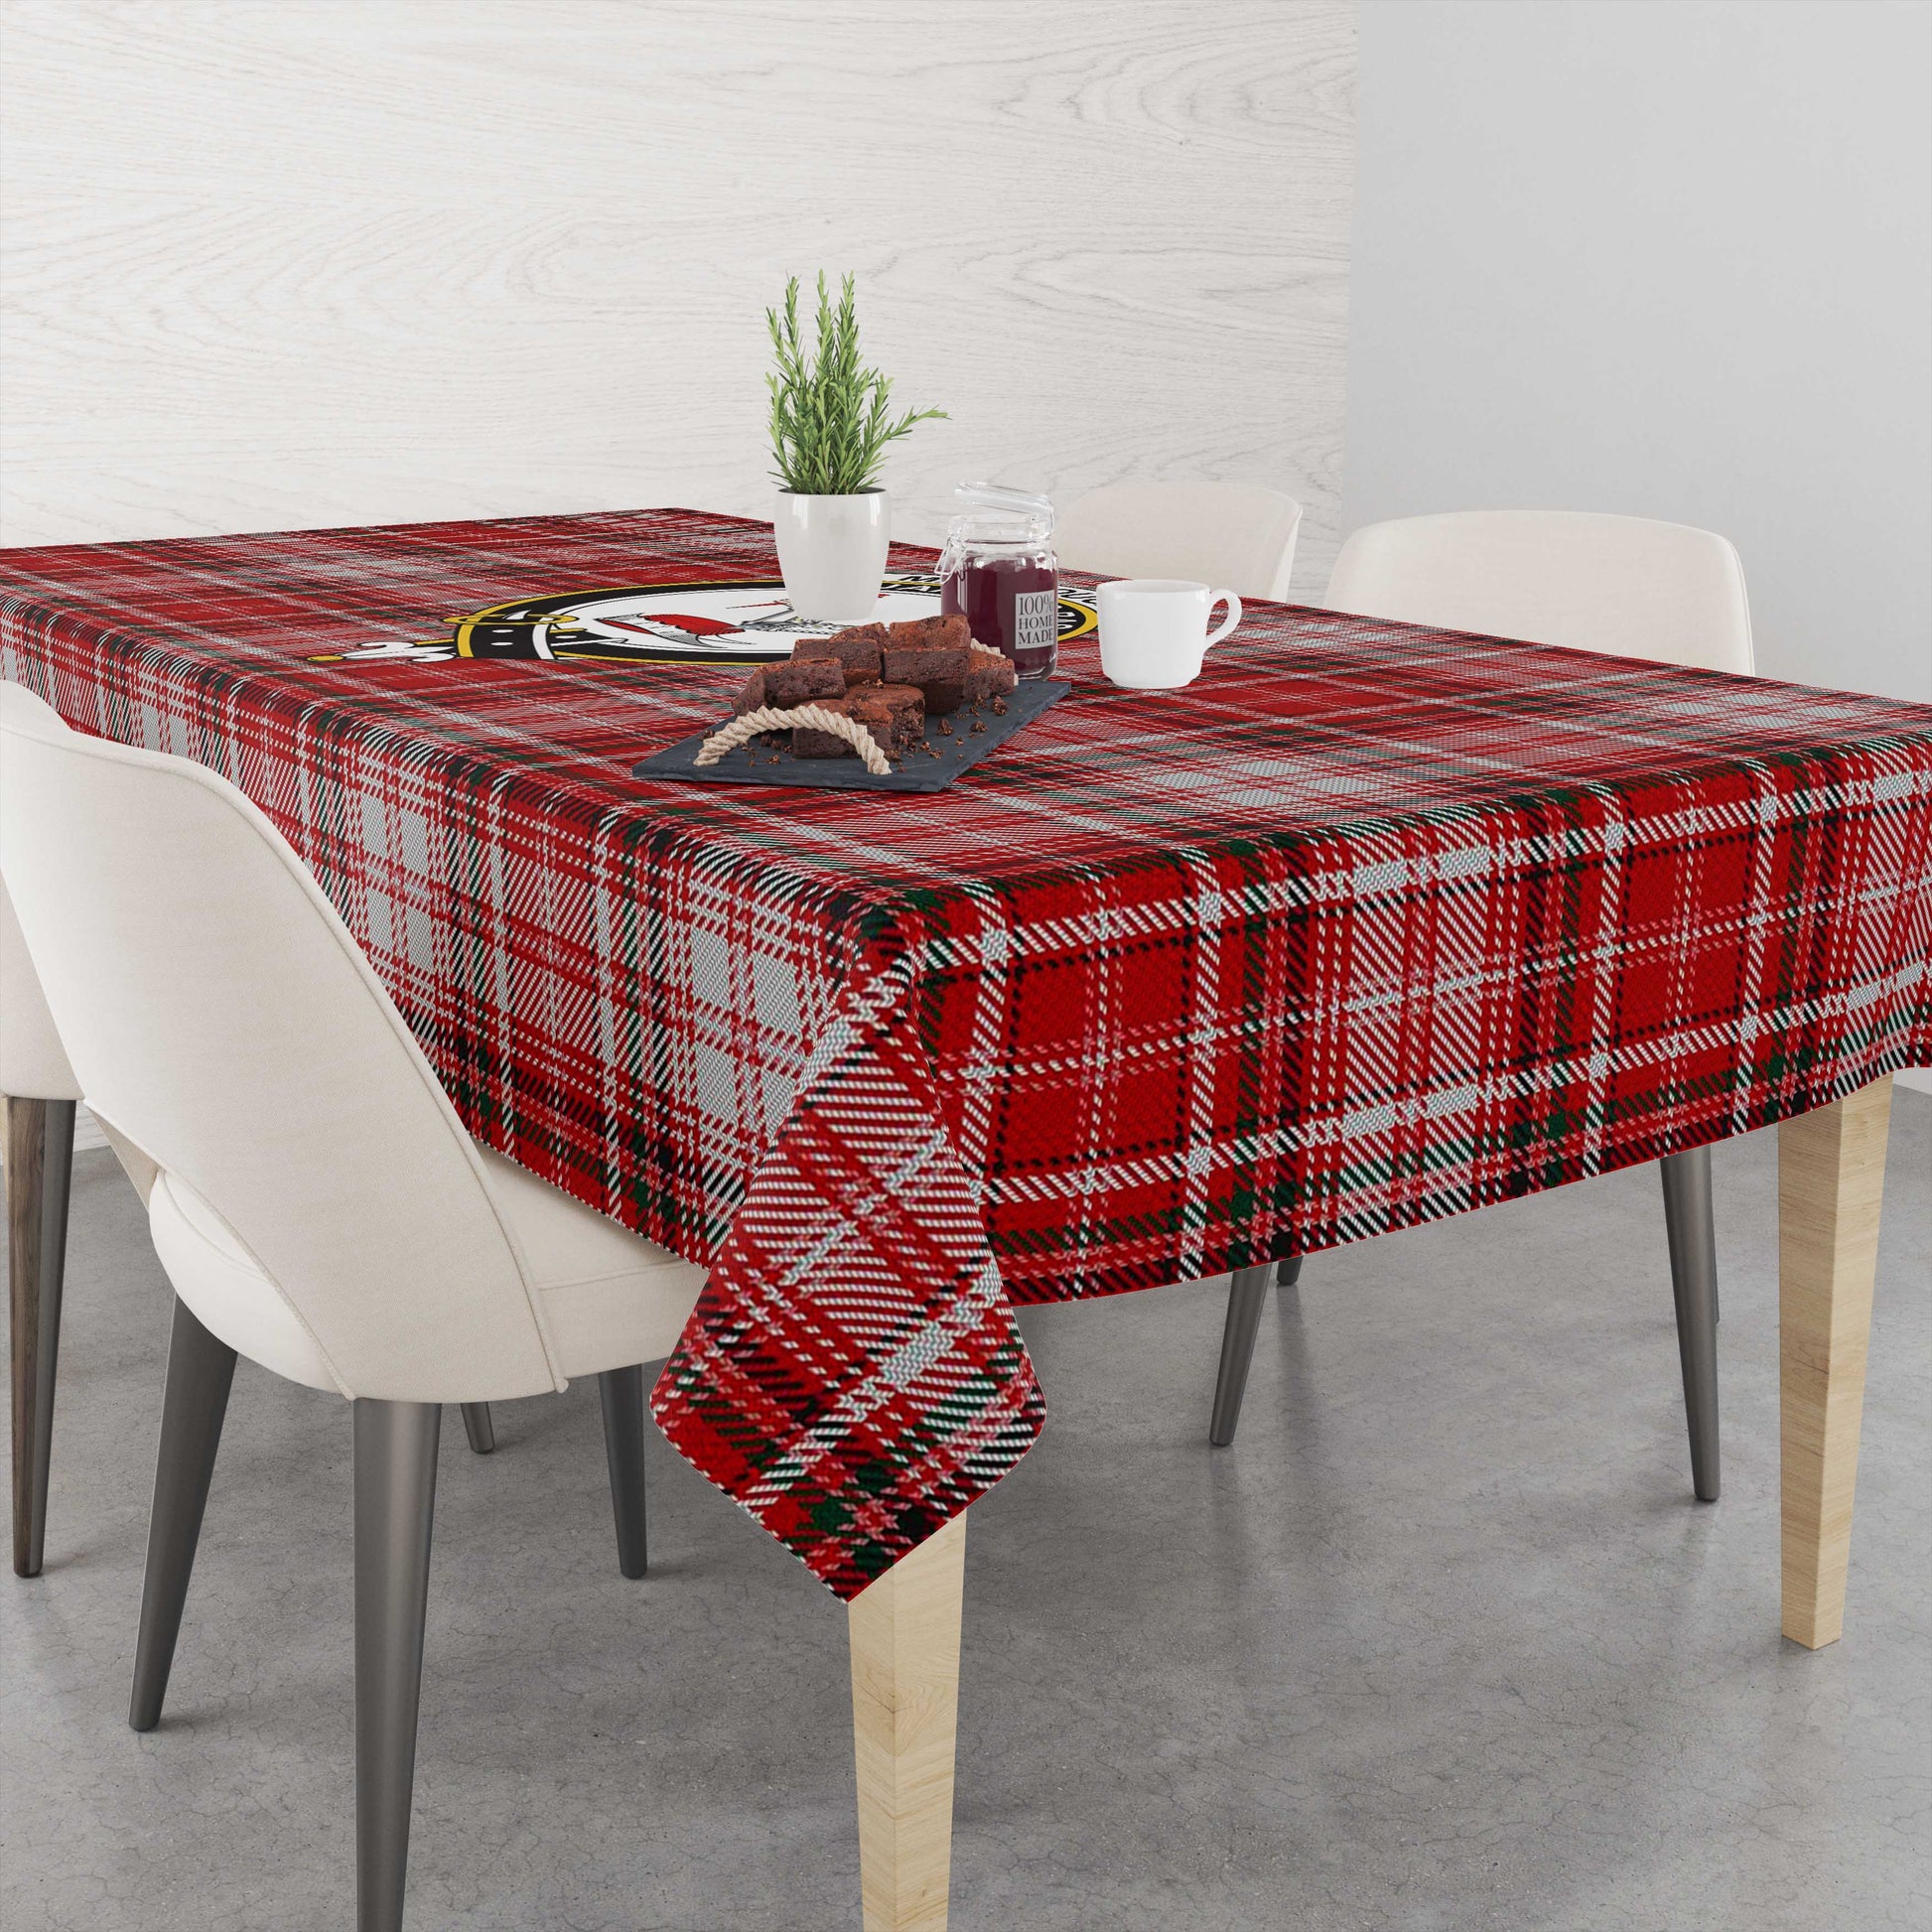 macdougall-dress-tatan-tablecloth-with-family-crest